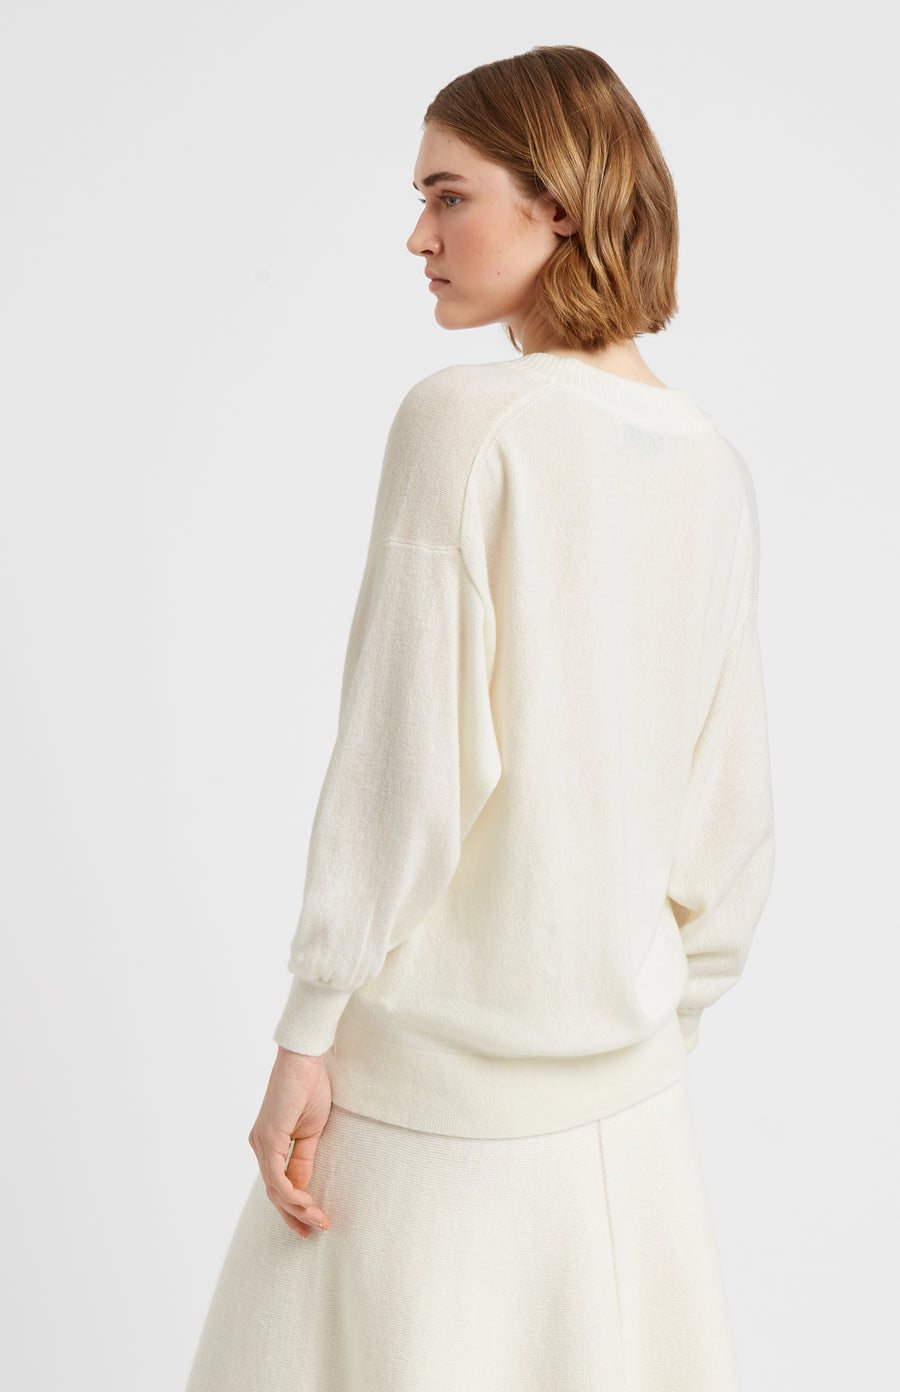 Pringle of Scotland Lightweight V Neck Cashmere Jumper In Off White rear view